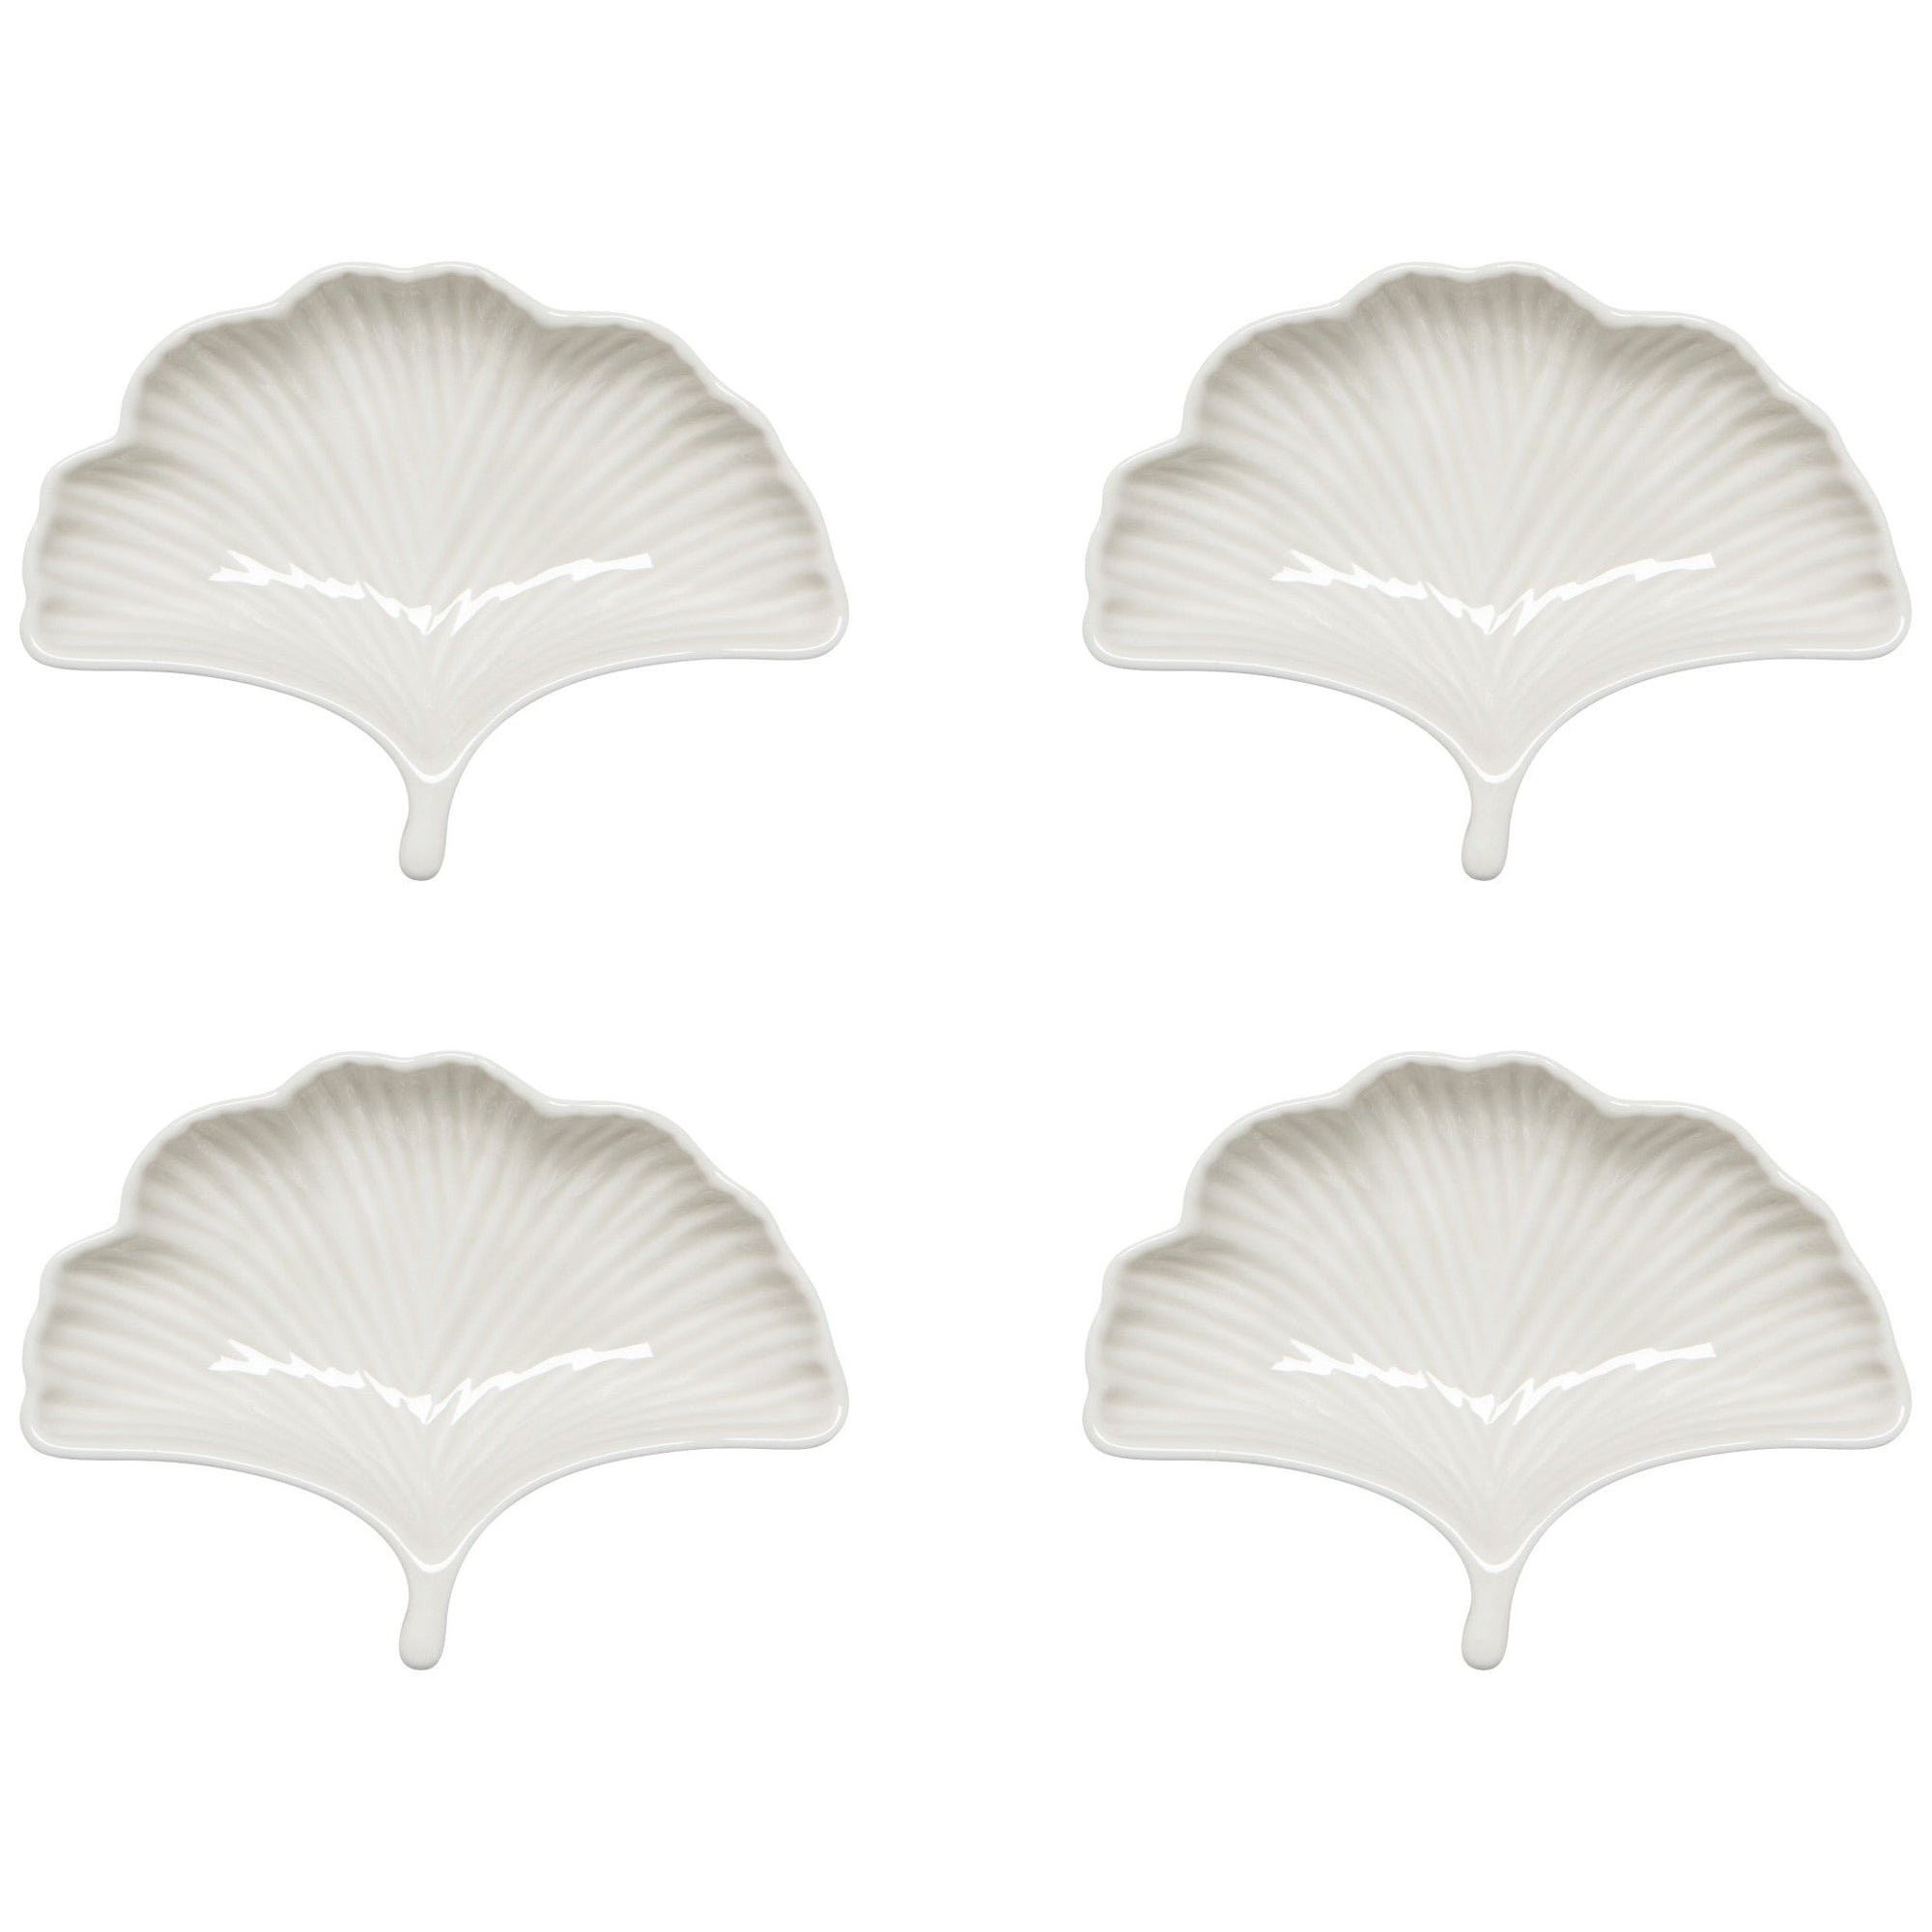 Ginkgo Dipping Dishes - Set of 4